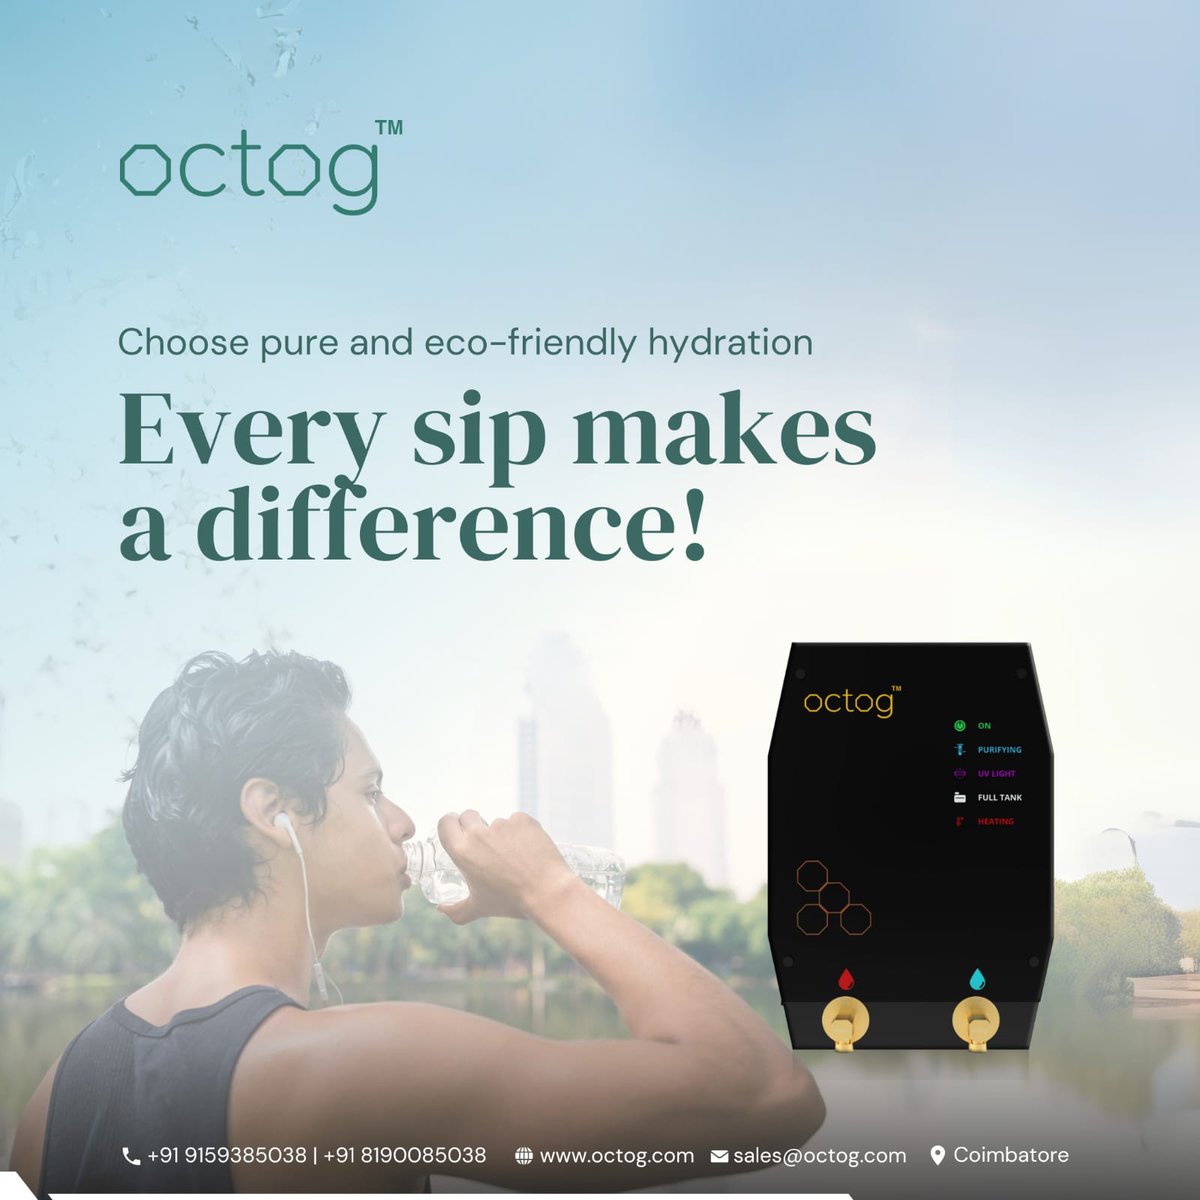 Quench your thirst responsibly with Octog water purifiers! 💧 Every sip is a step towards a cleaner planet. 

Reach out at

📱+91- 9159385038 
+91- 8190085038
📧sales@octog.com
Website:octog.com

 #InnovativeWaterSolutions